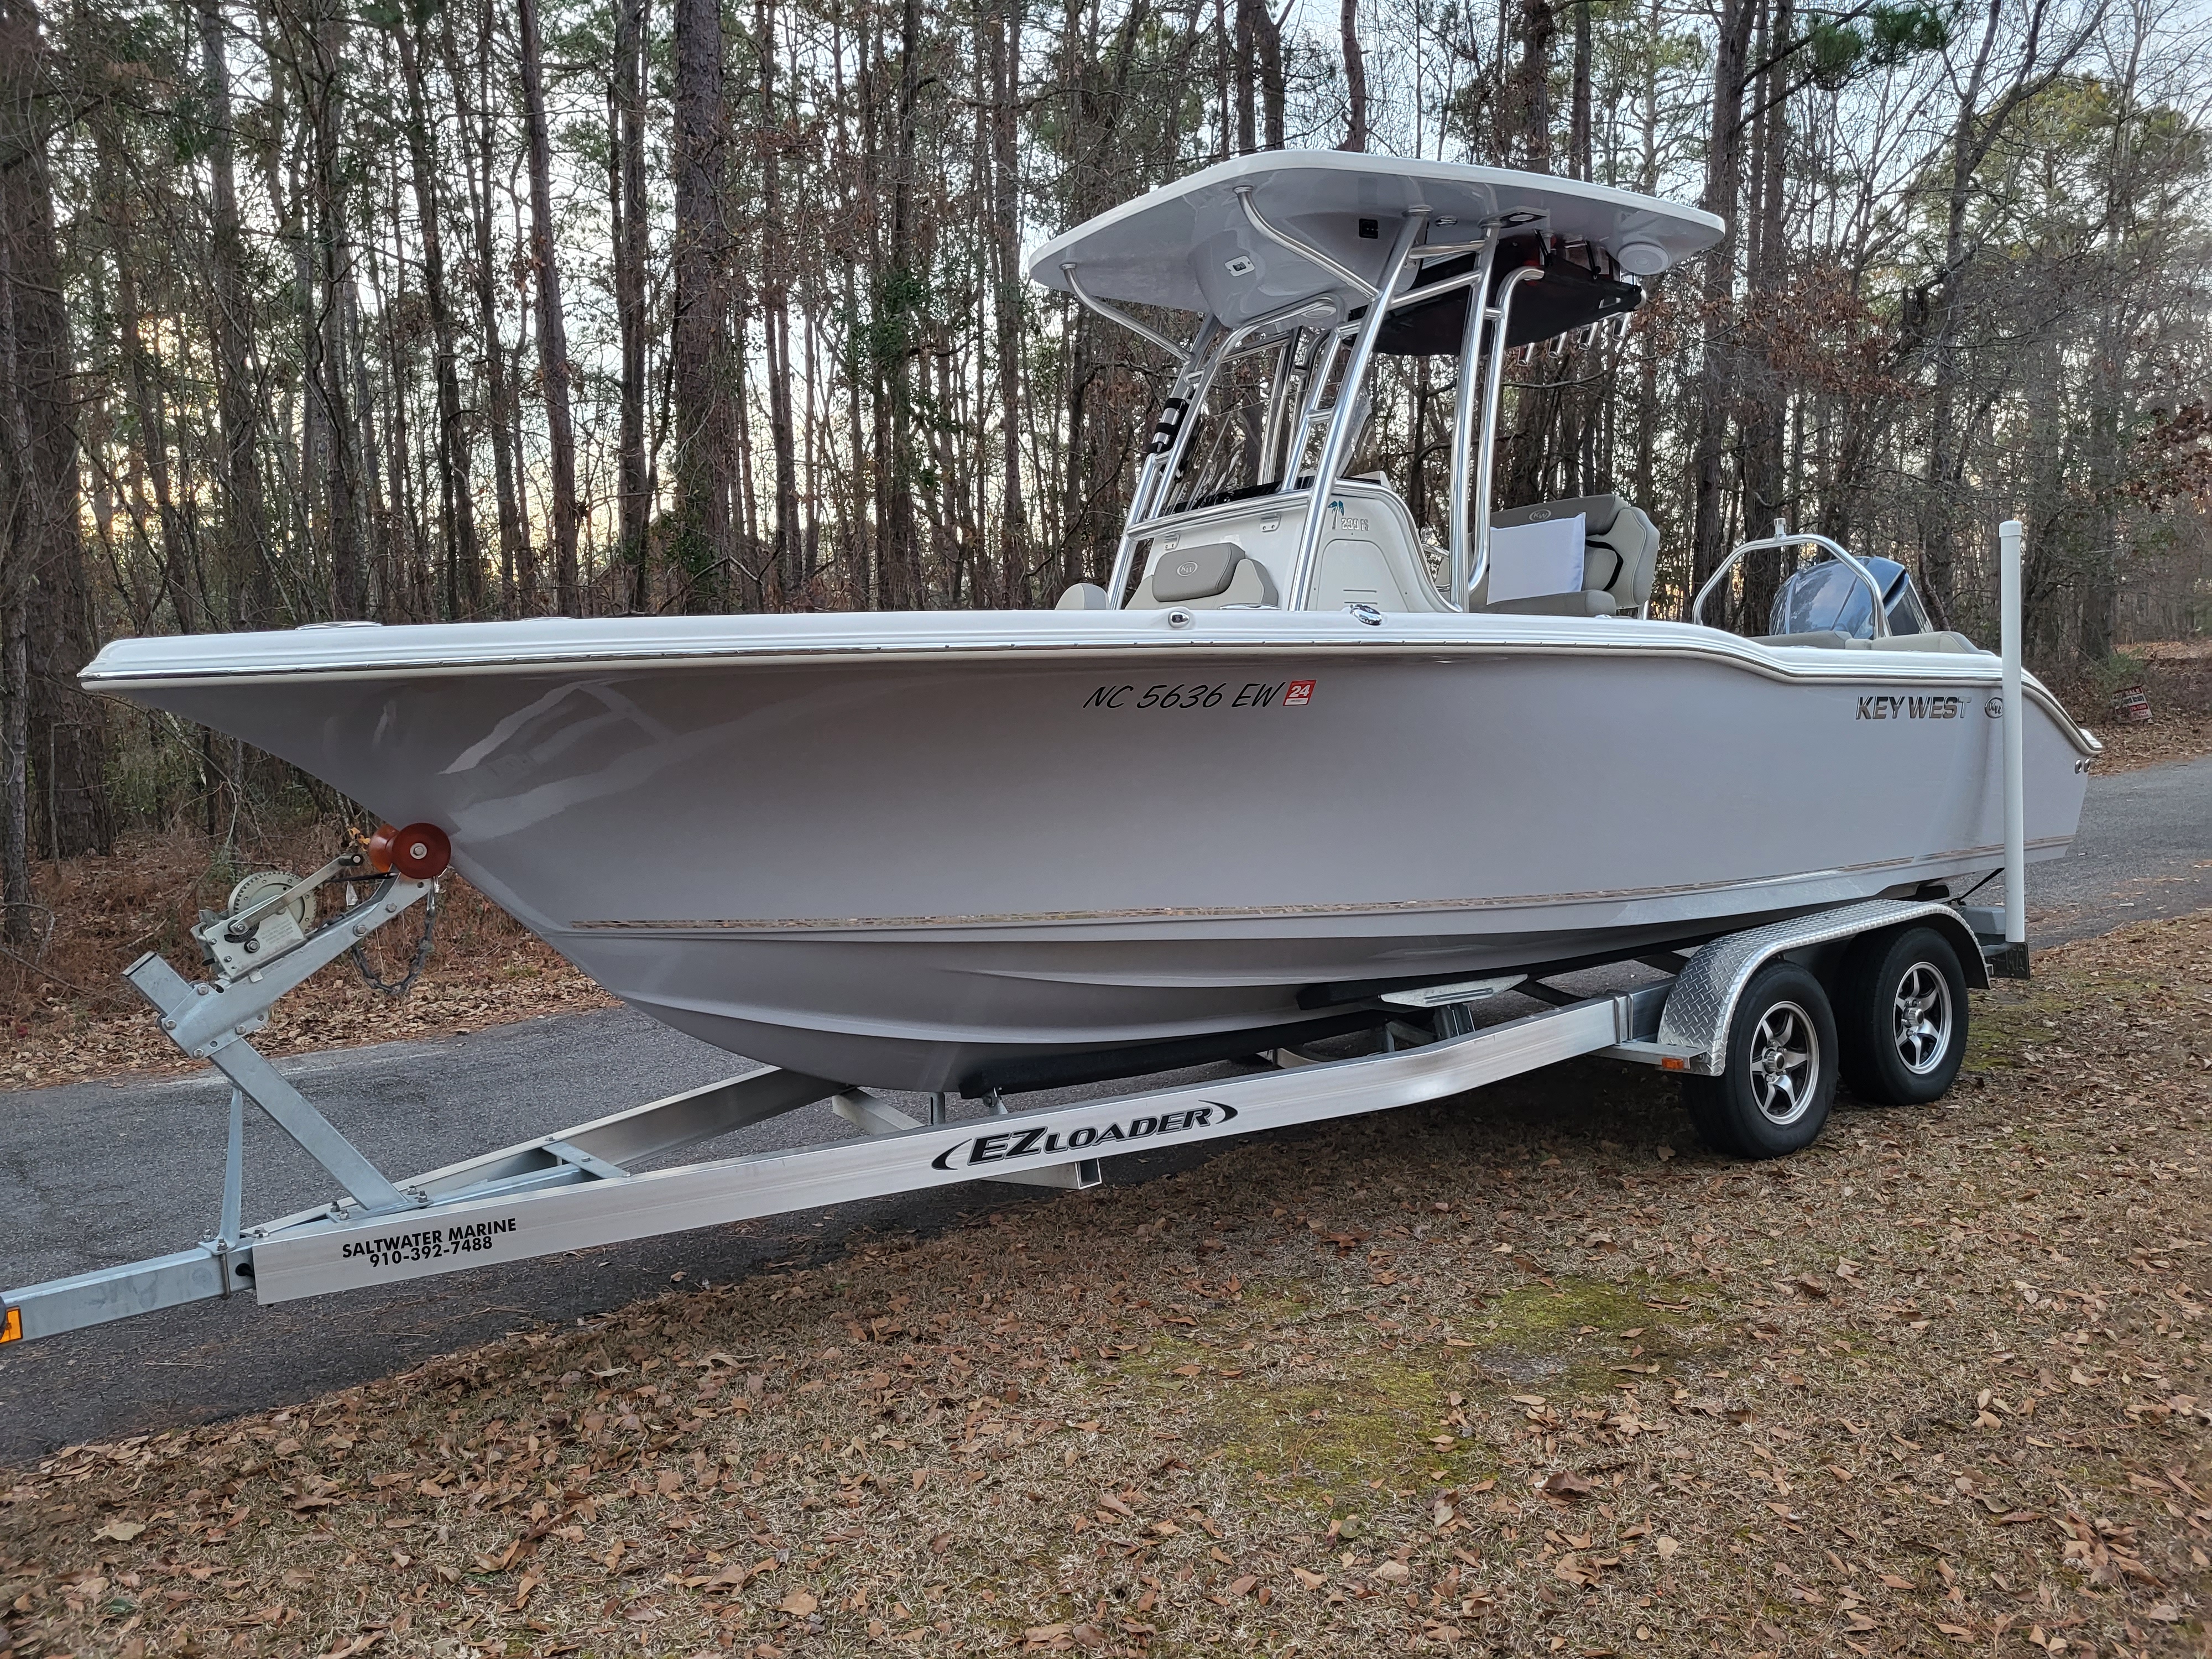 2022 Key West 239FS Power boat for sale in Laurinburg, NC - image 2 